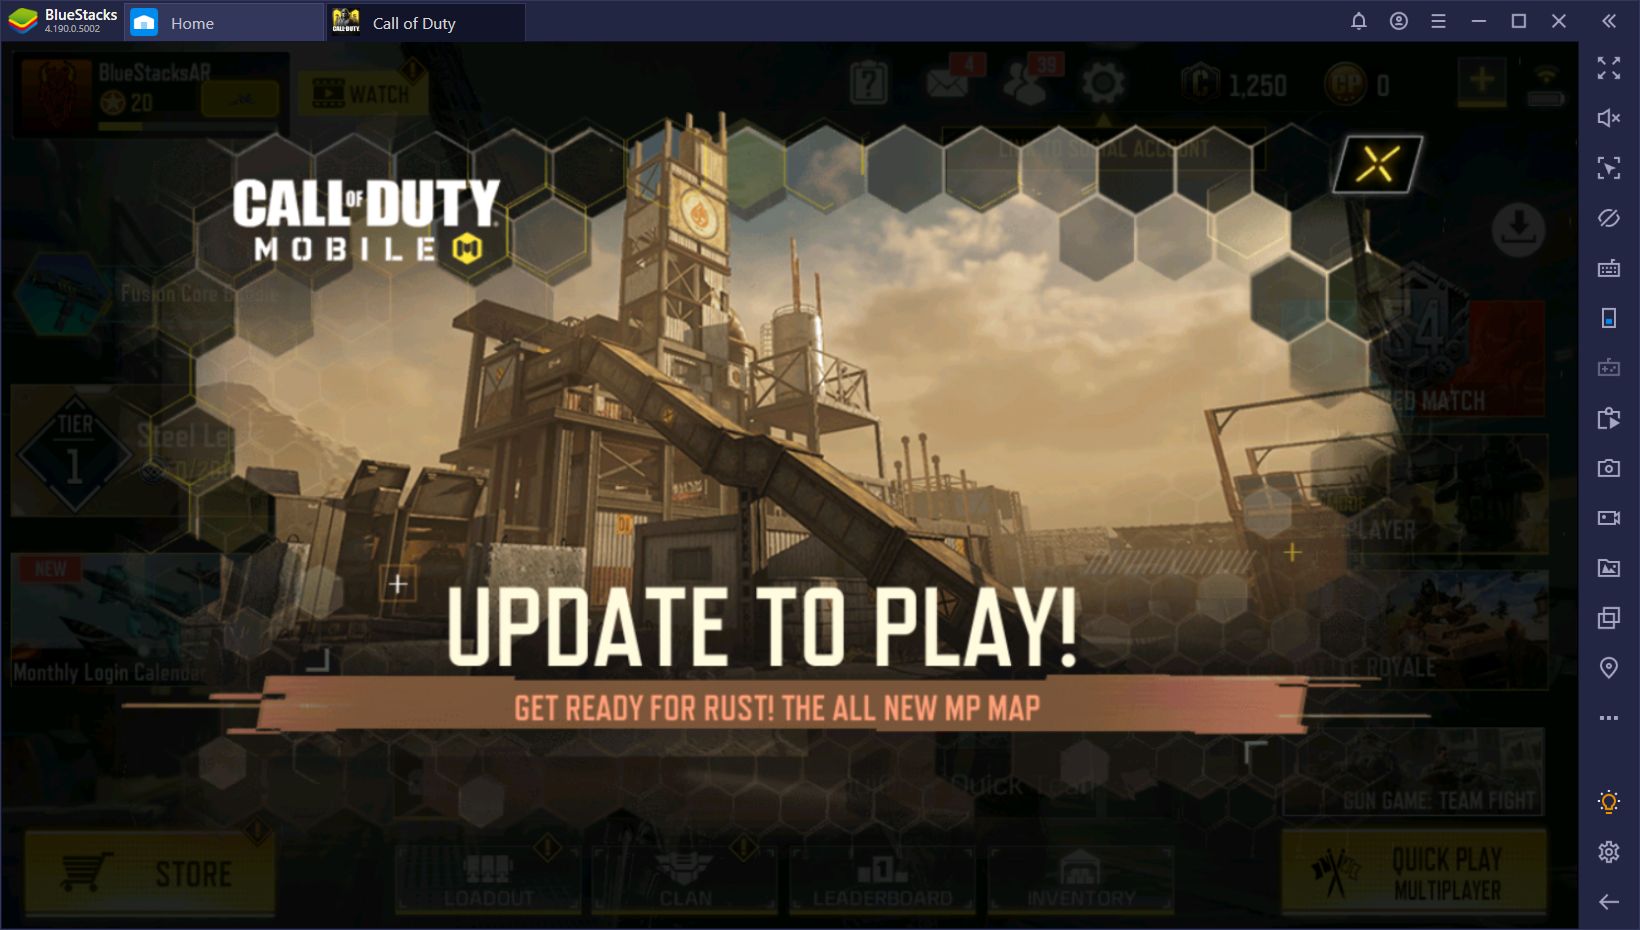 New Game Modes and Maps in Call of Duty: Mobile’s Newest Upcoming Patch